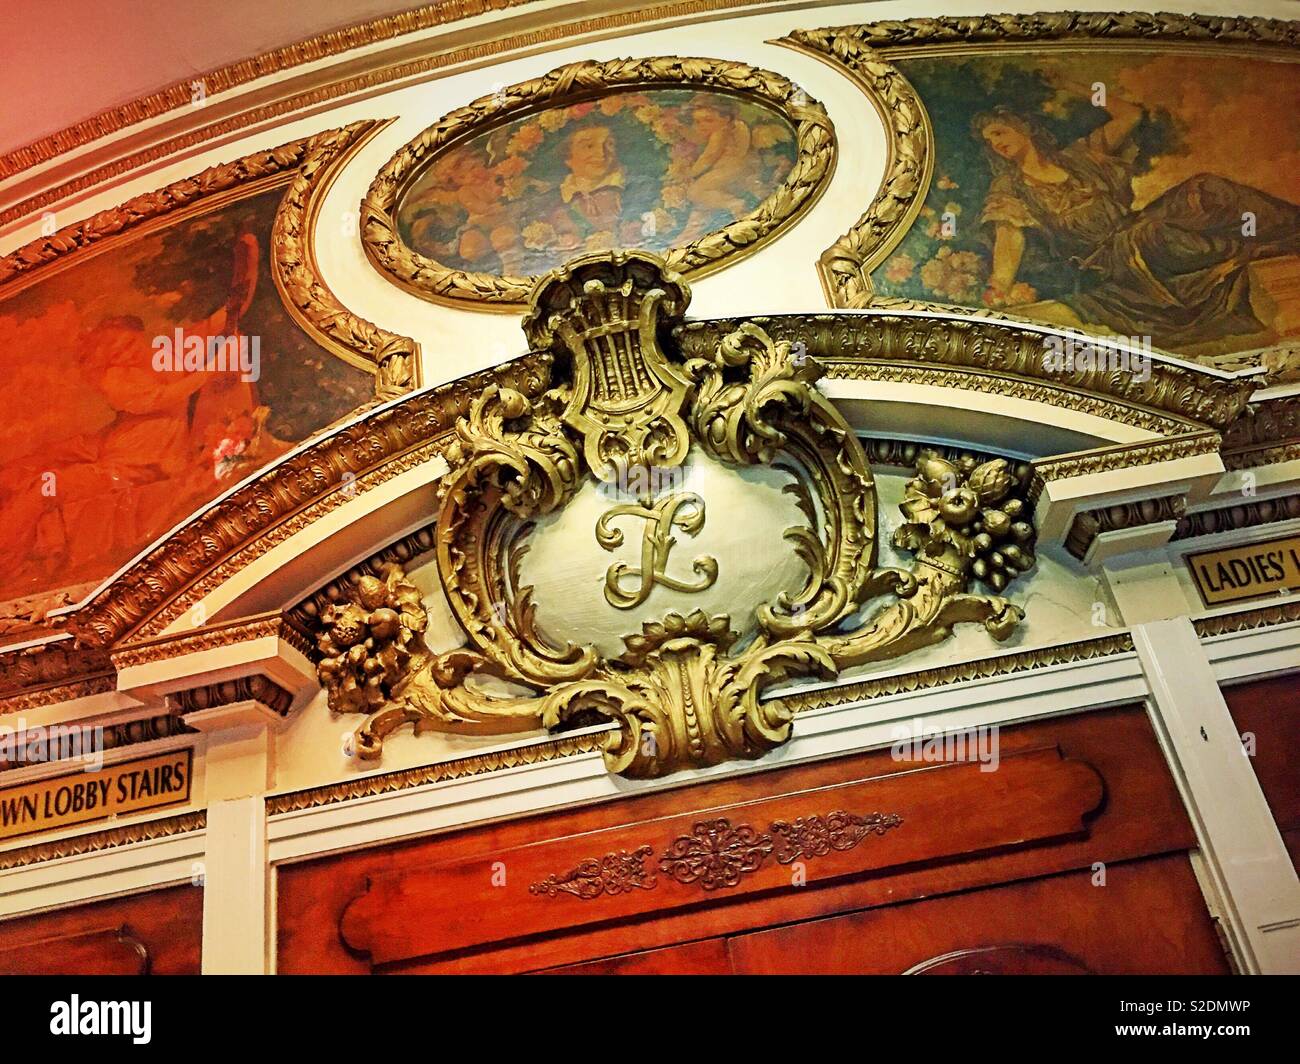 Artwork in the lobby of the Lyceum Theatre, Times Square, New York City, USA Stock Photo